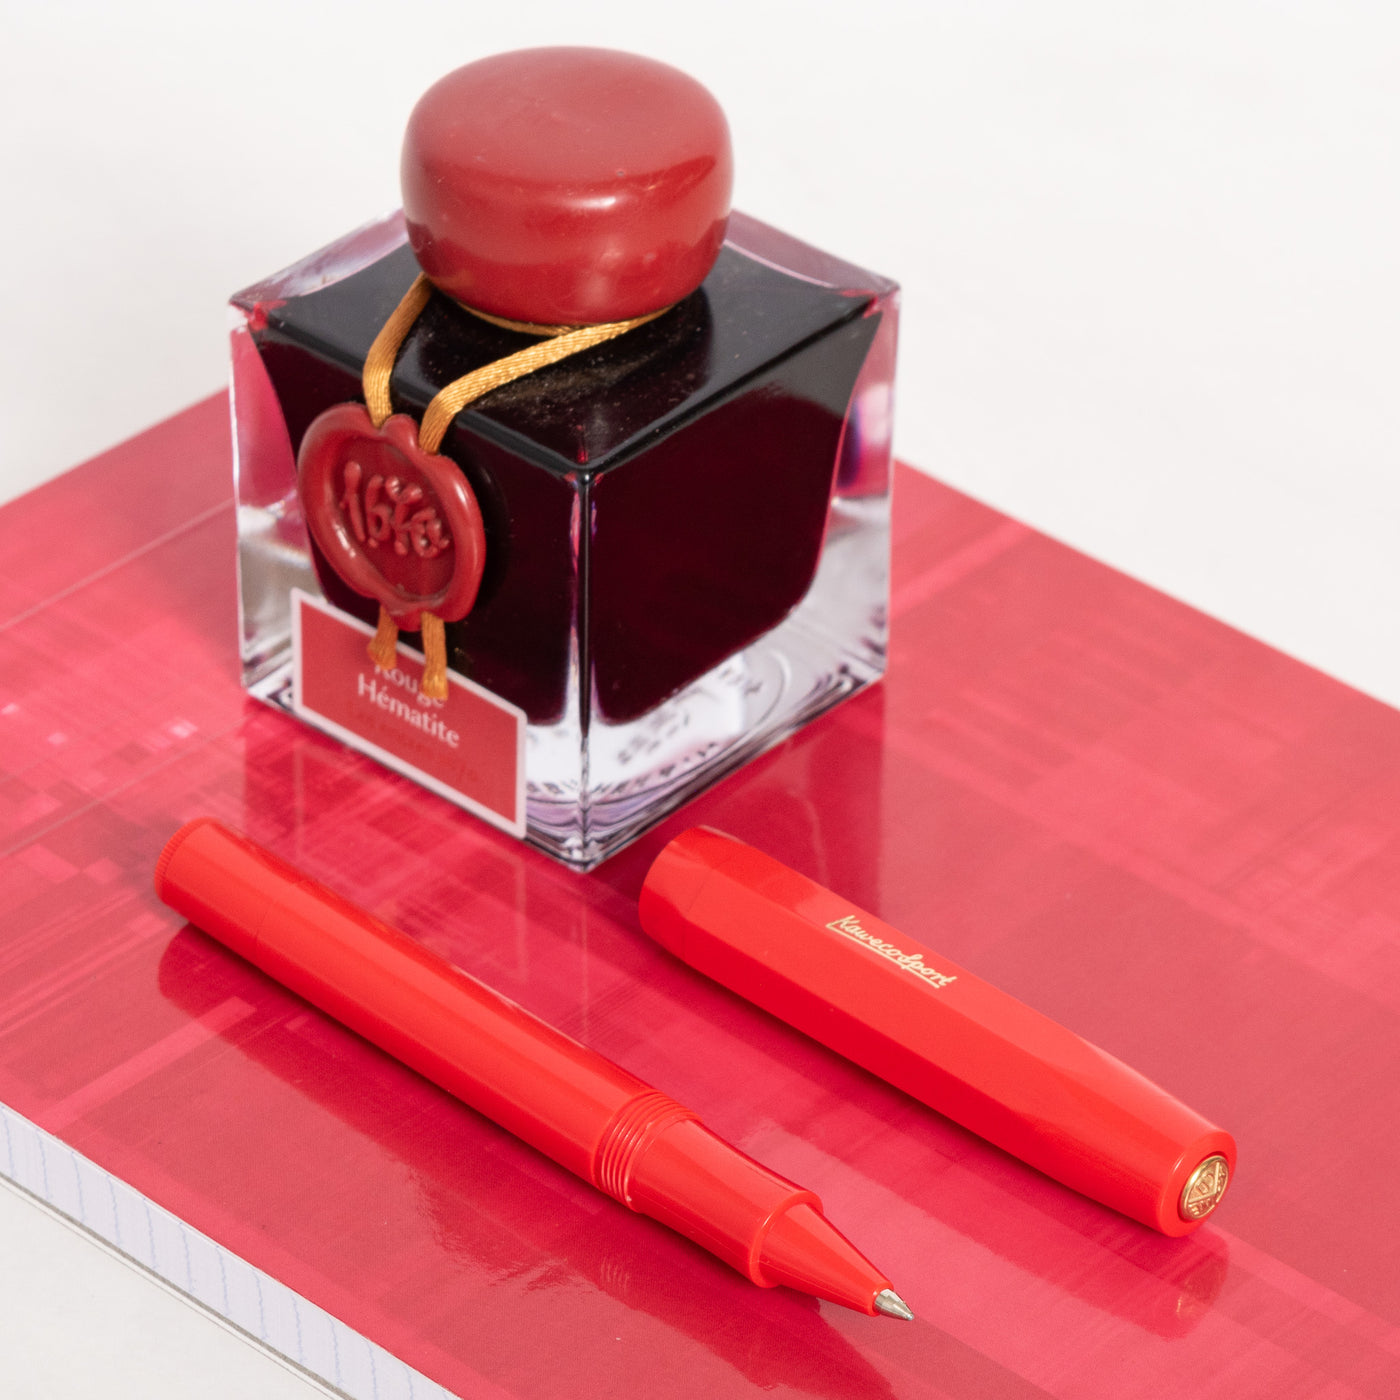 Kaweco Sport Classic Red Rollerball Pen bright